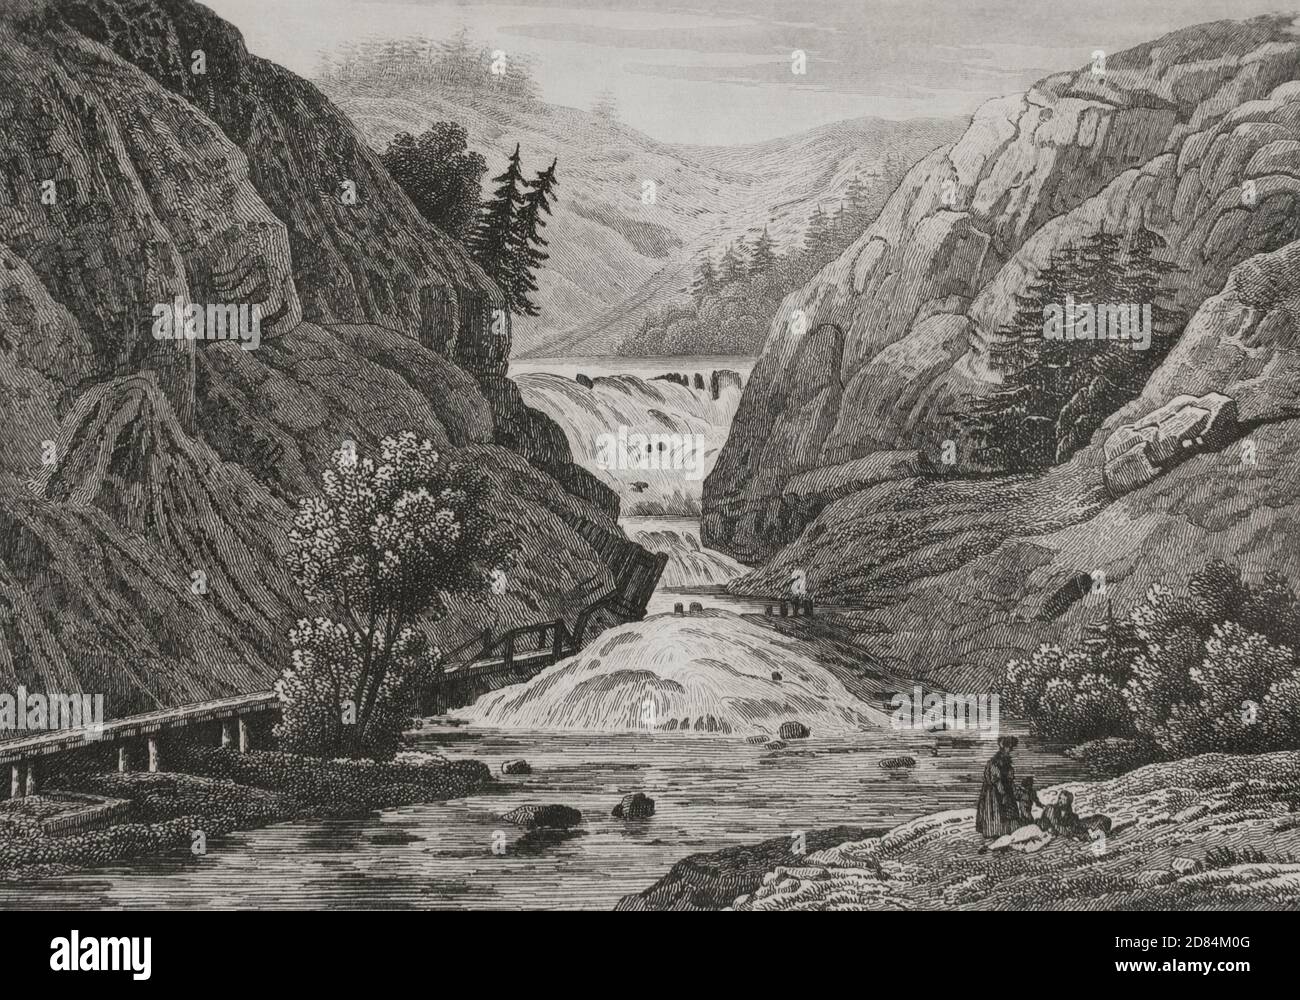 United States of America. Waterfalls at Mount Ida. Engraving by Milbert. Panorama Universal. History of the United States of America, from 1st edition of Jean B.G. Roux de Rochelle's Etats-Unis d'Amérique in 1837. Spanish edition, printed in Barcelona, 1850. Stock Photo